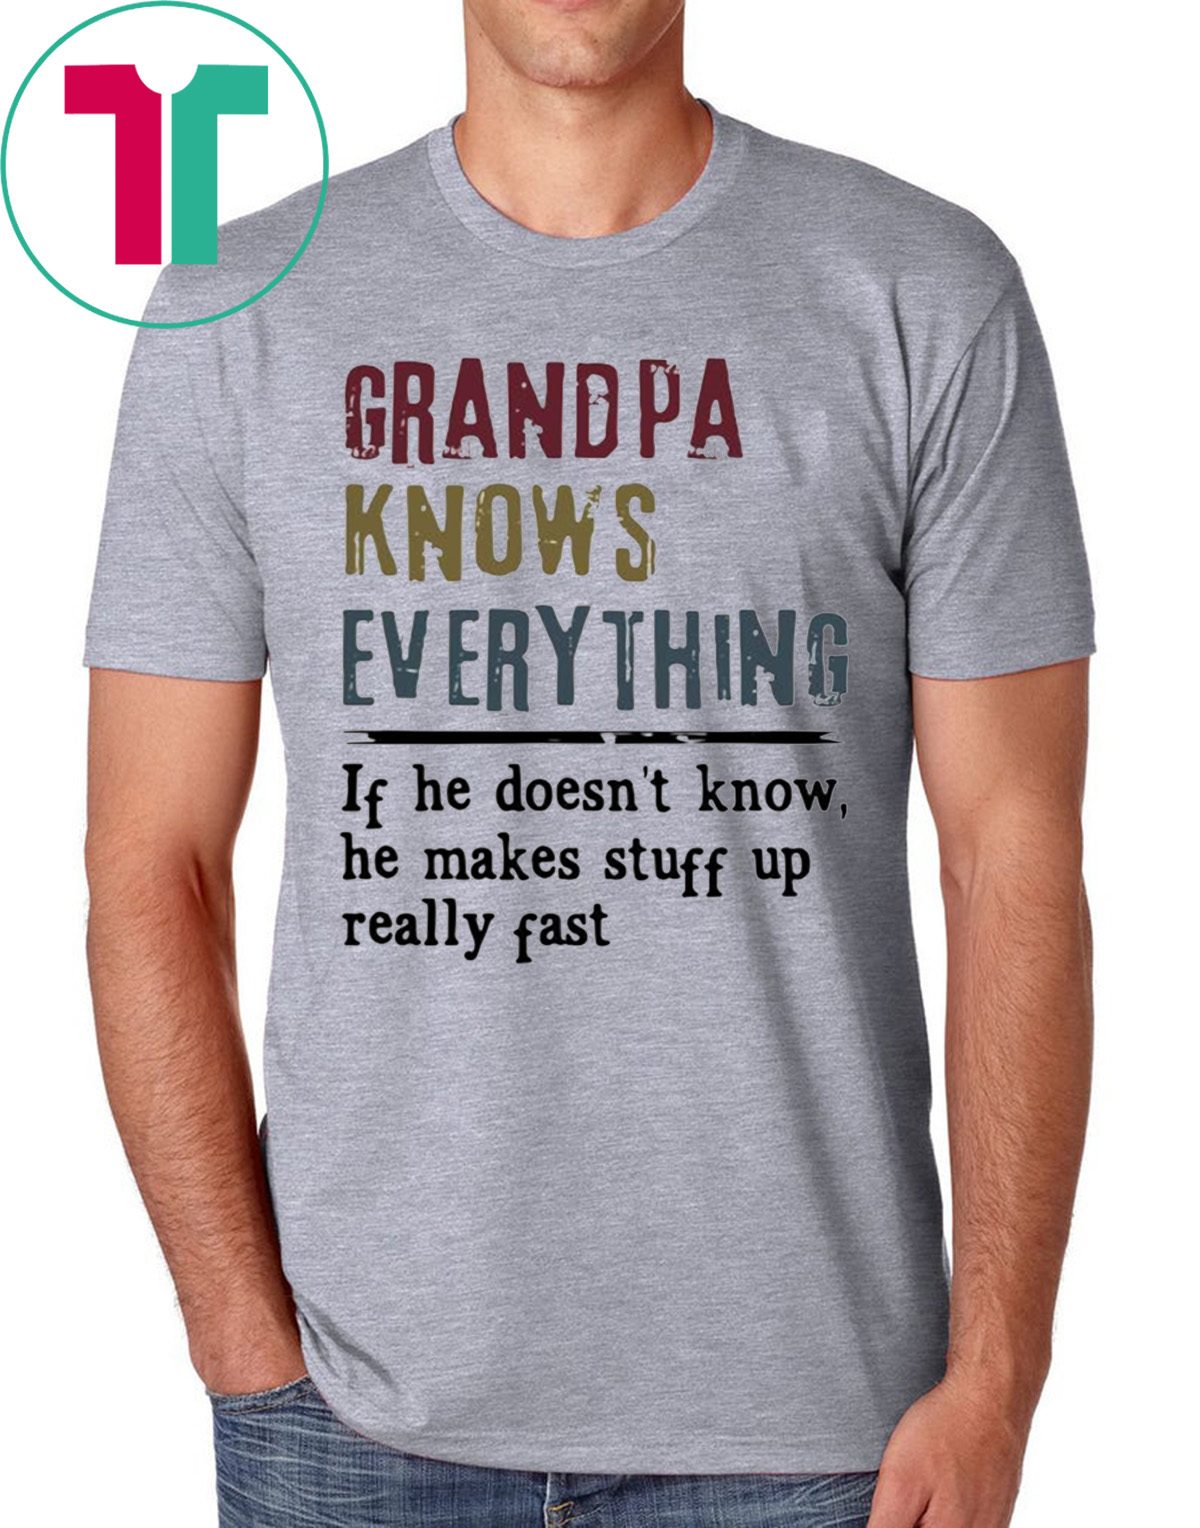 Grandpa knows everything if he doesn’t know he makes stuff up really ...